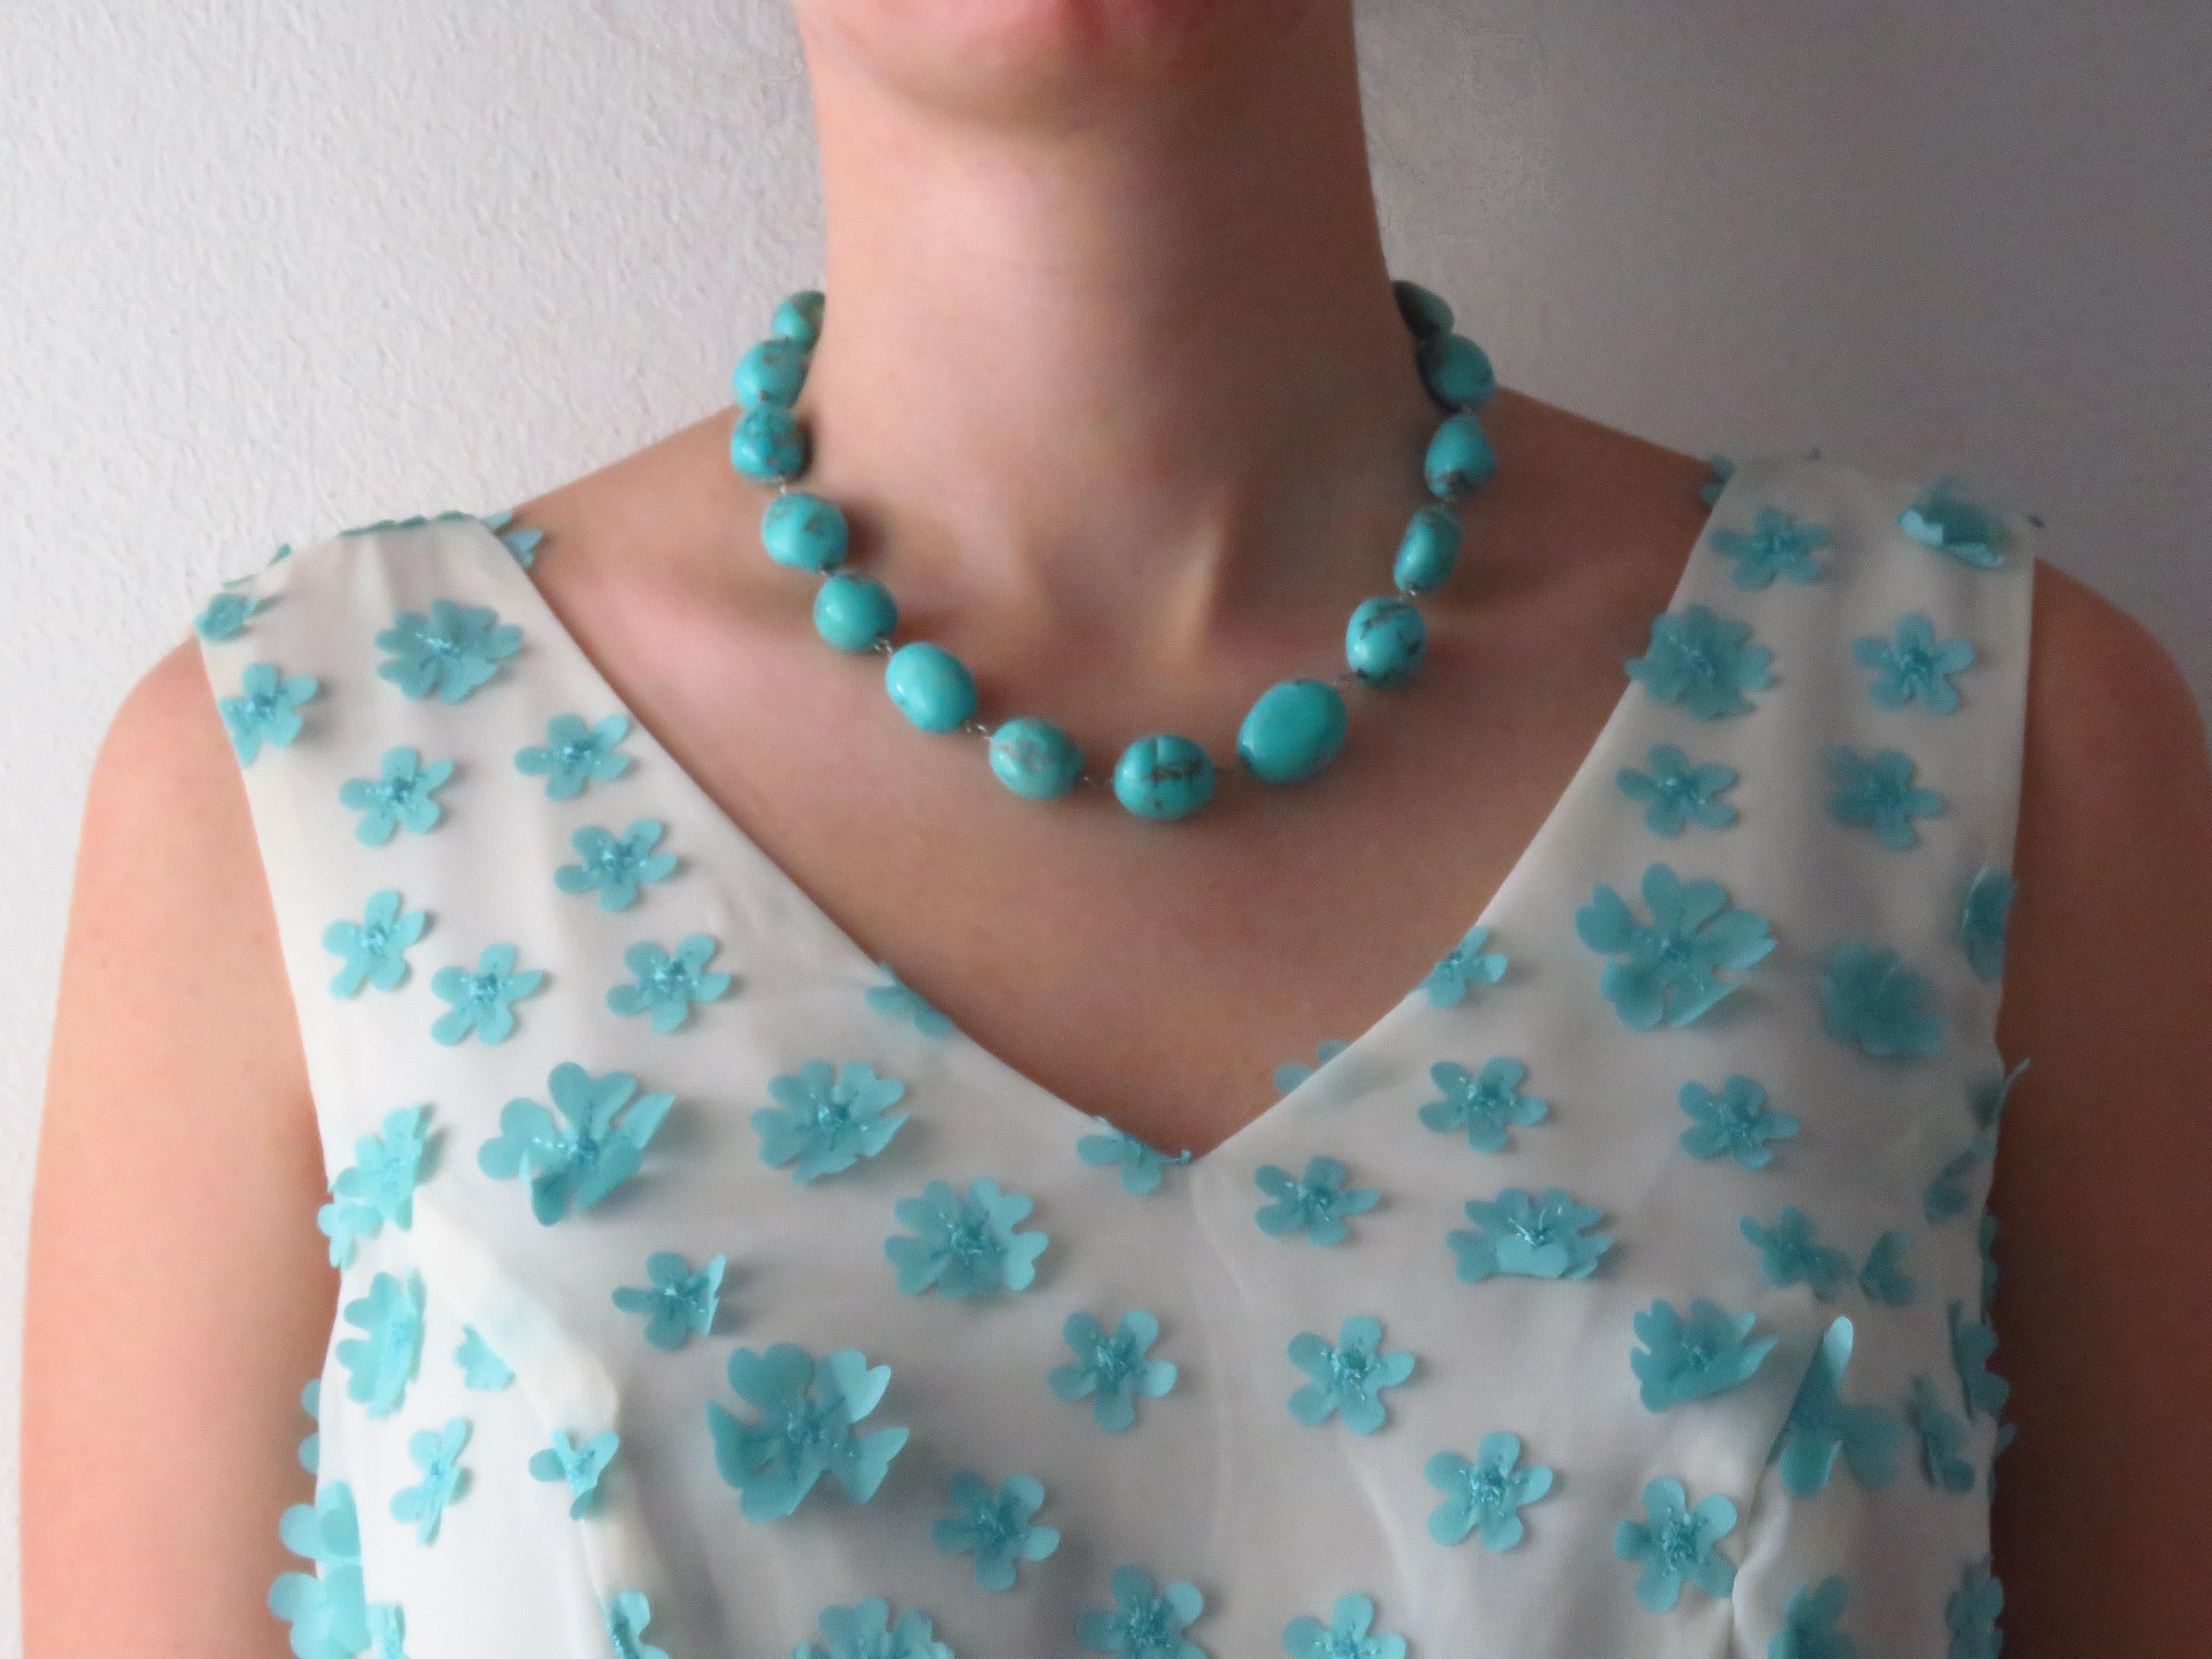 Women's Turquoise White Gold Necklace Handcrafted in Italy by Botta Gioielli